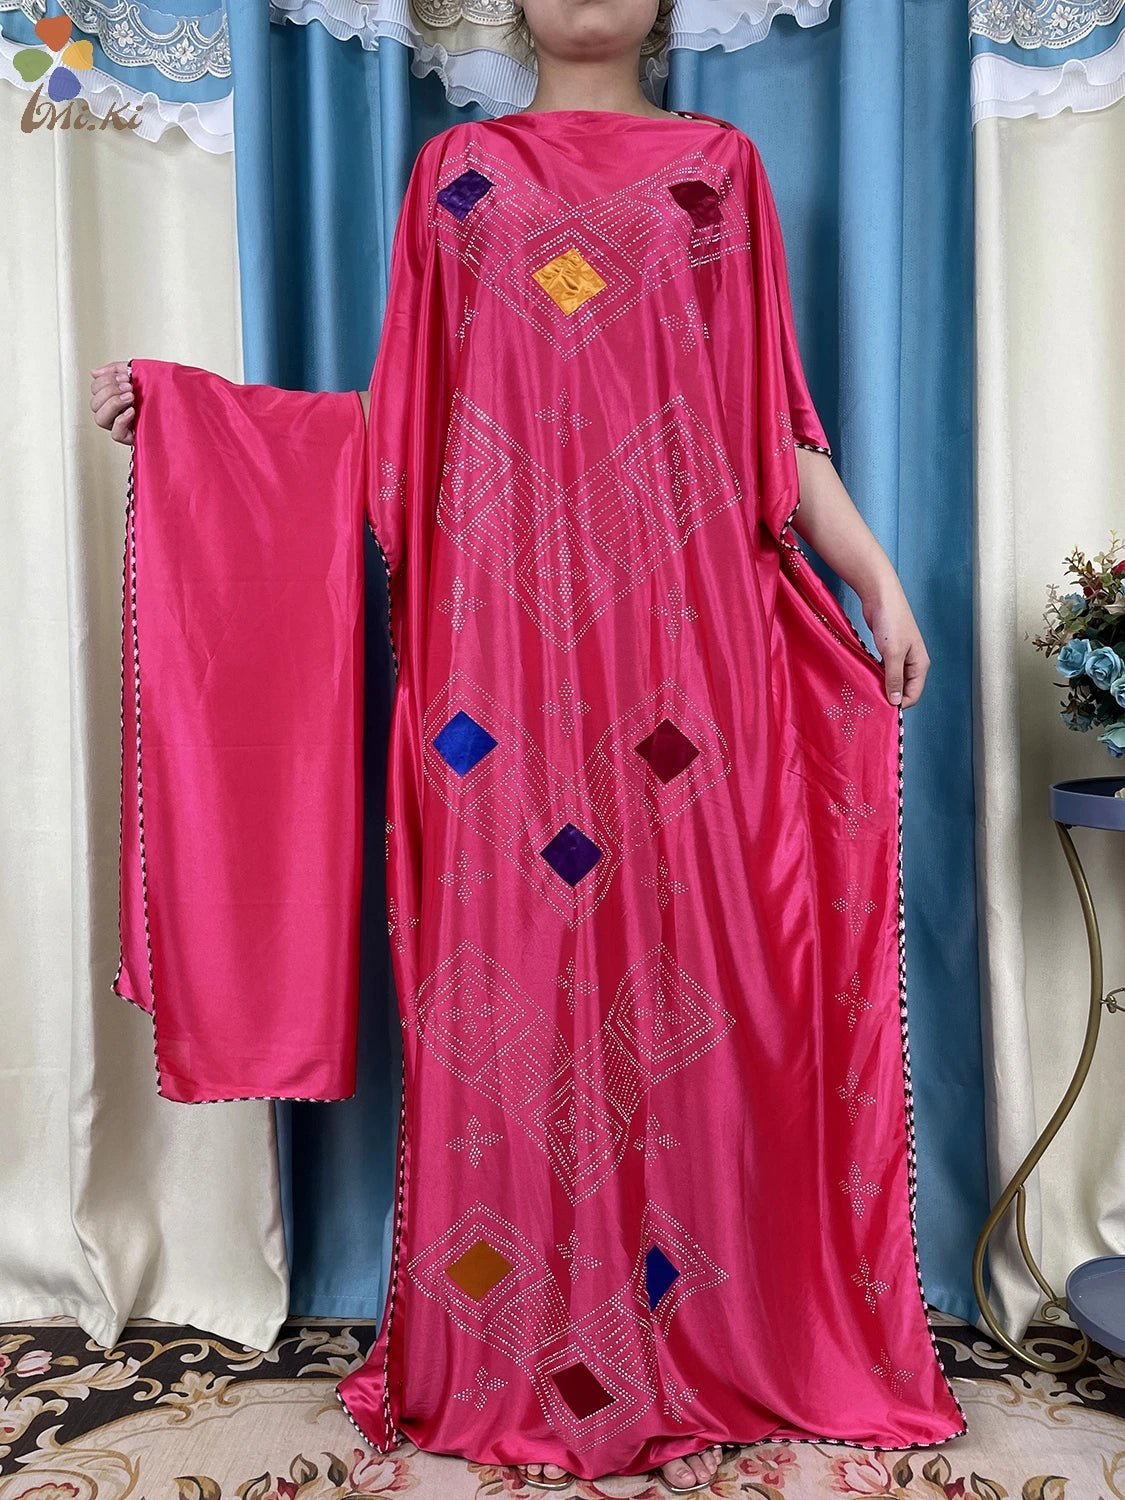 Luxurious New African Abaya: Muslim Prayer Clothing for Women with Exquisite Inlays - Flexi Africa - www.flexiafrica.com